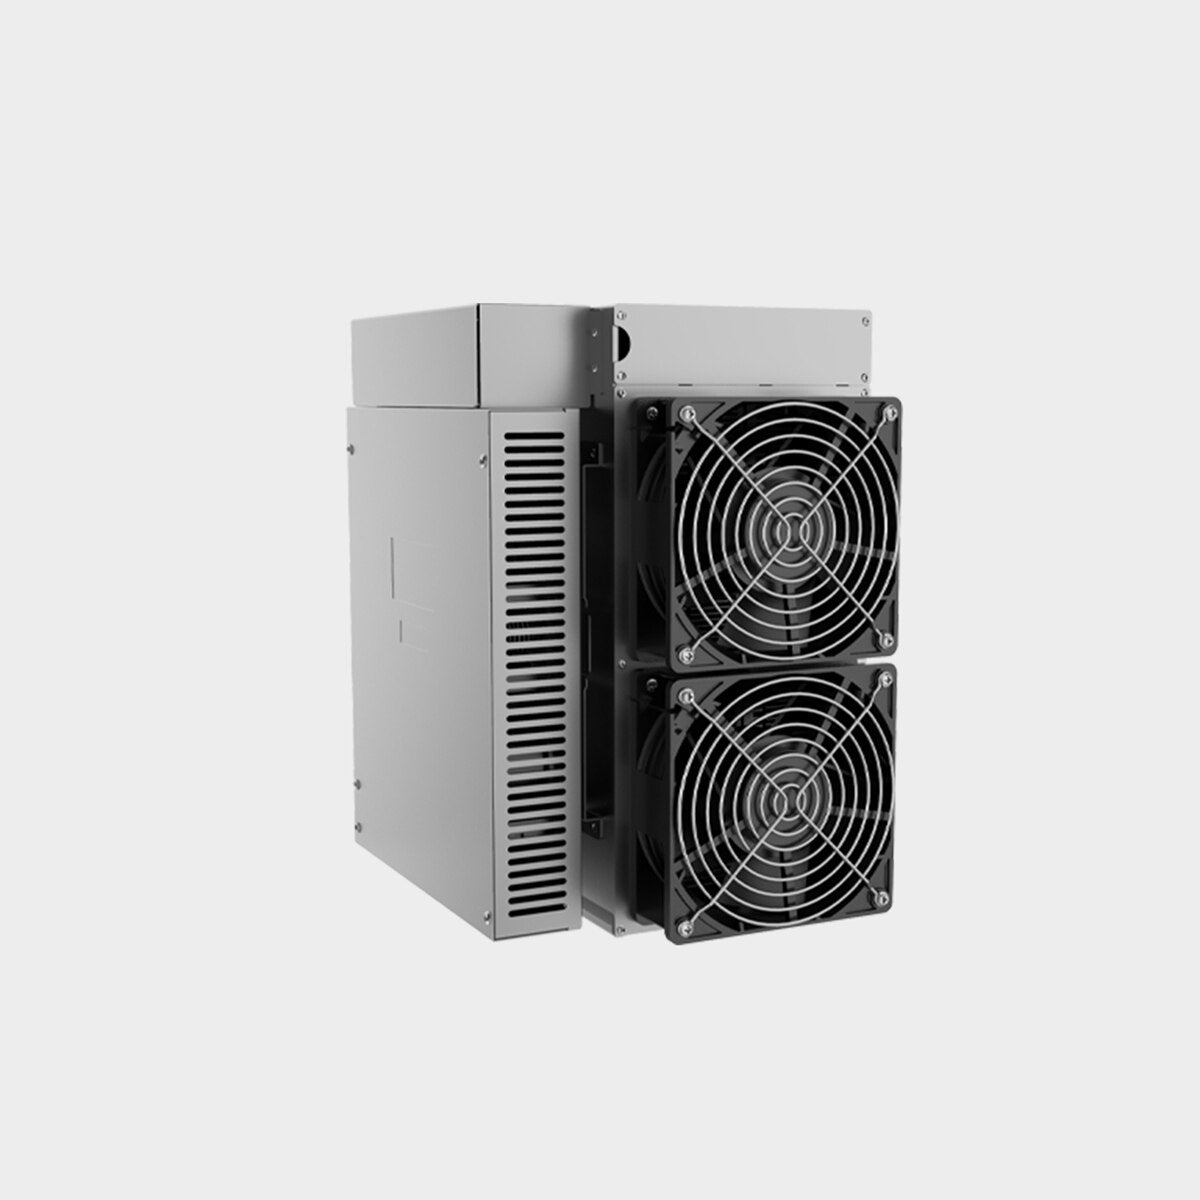 iPollo B1L BTC Miner with 60Th Hashrate 3300W Power Supply Included